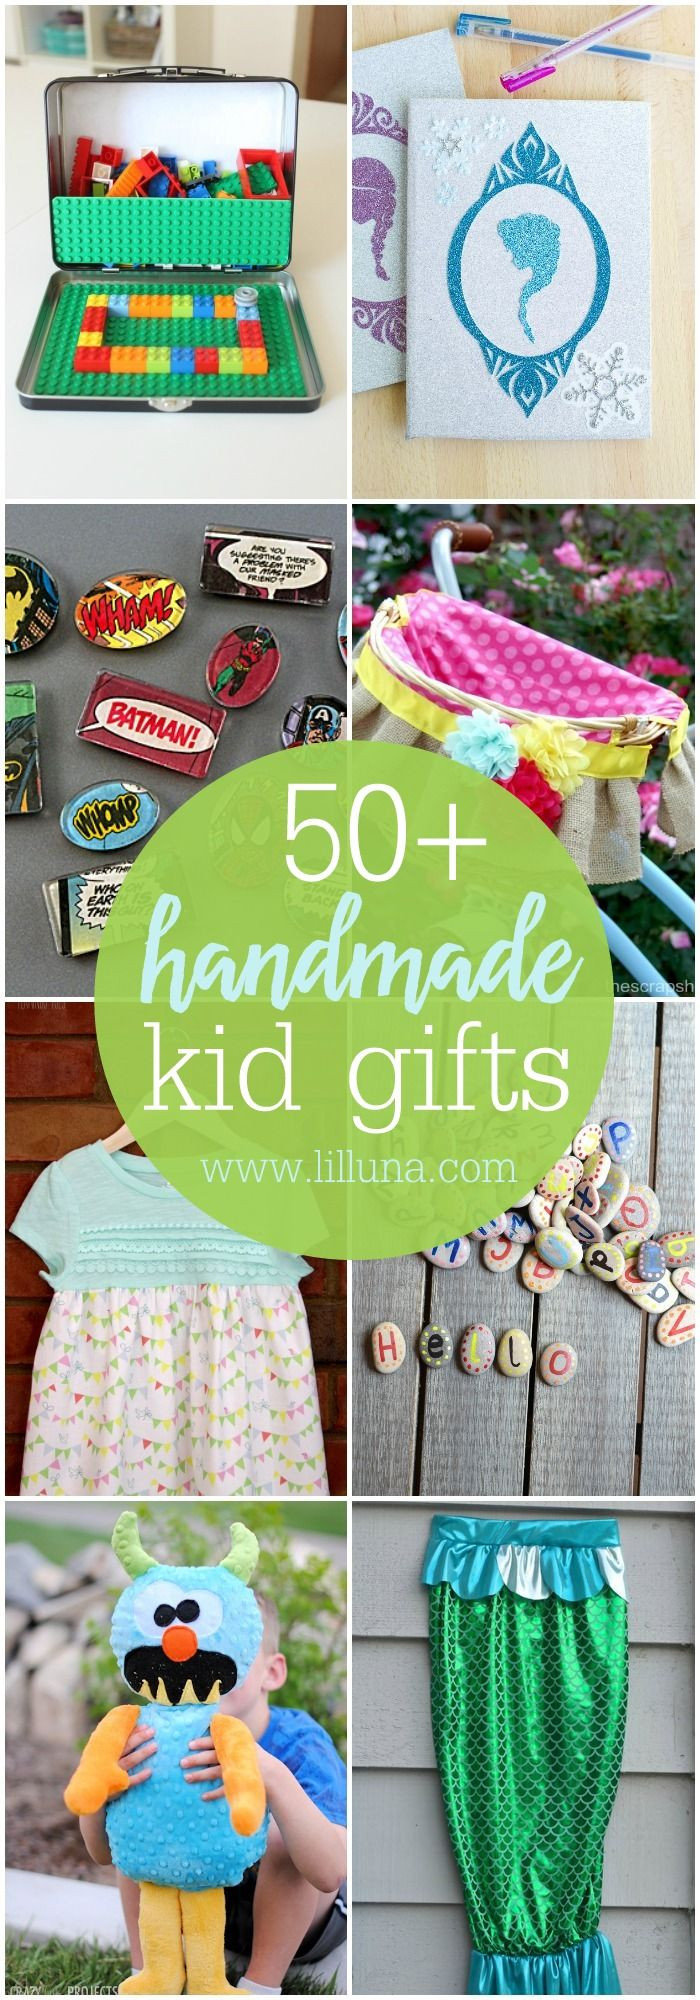 Cool Gift Ideas For Kids
 50 Handmade Gift ideas for Kids so many great ideas to